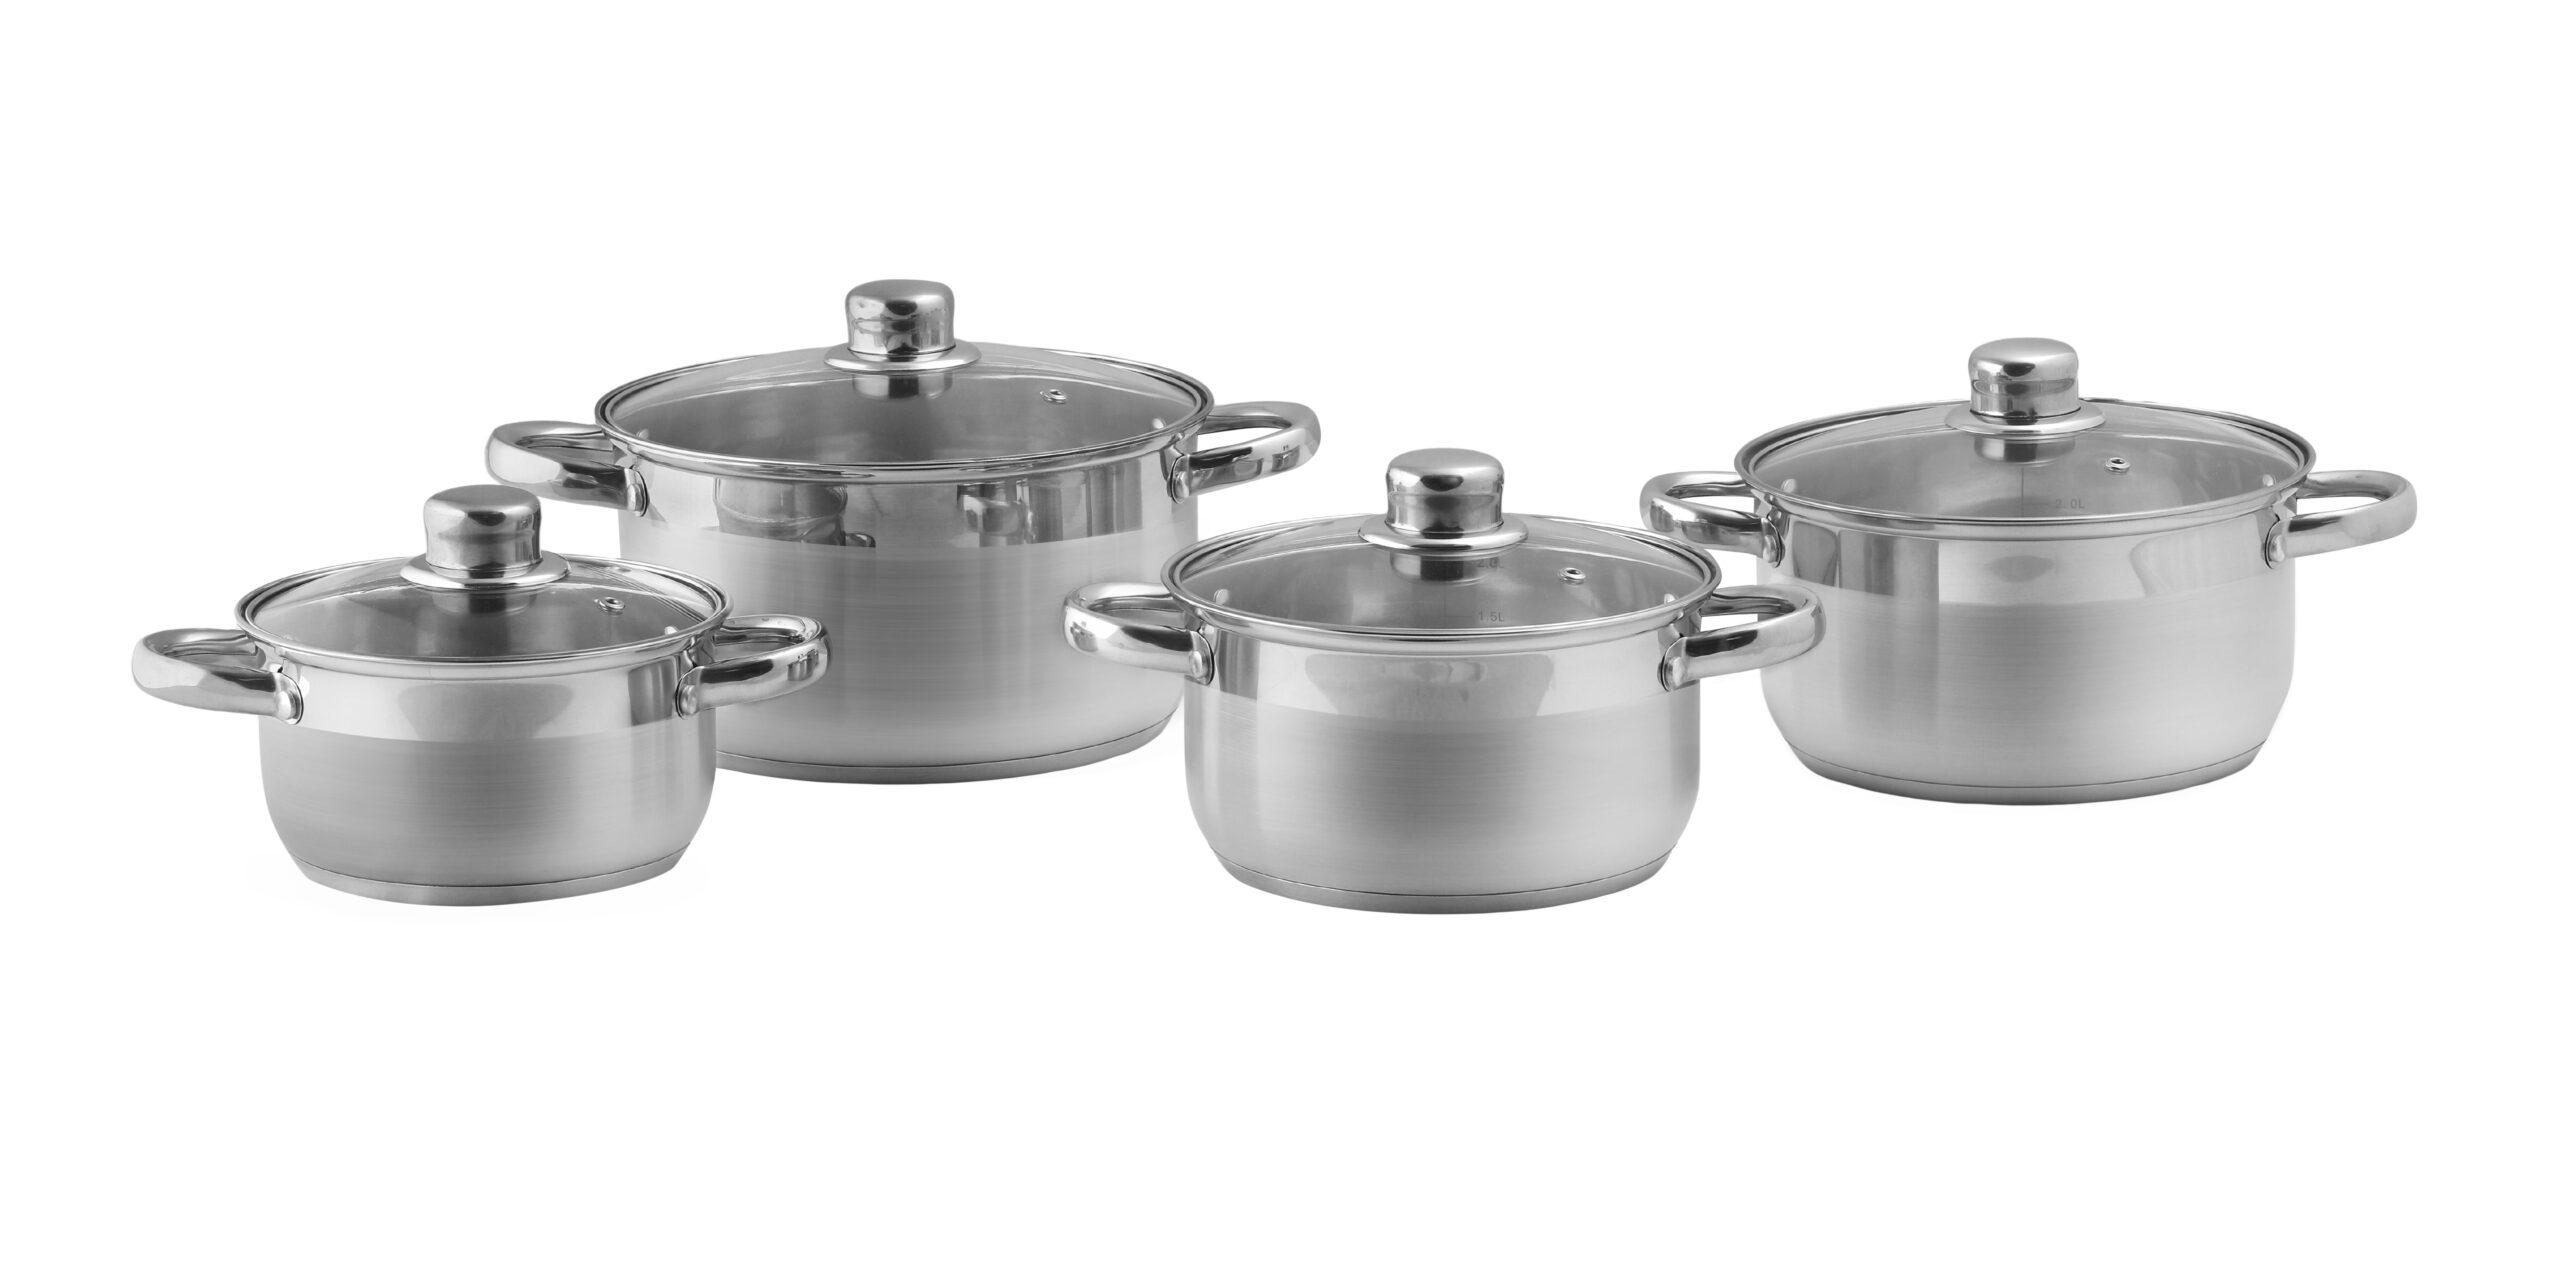 KOKO FAME Stainless Steel Cookware Set - 8 Pieces